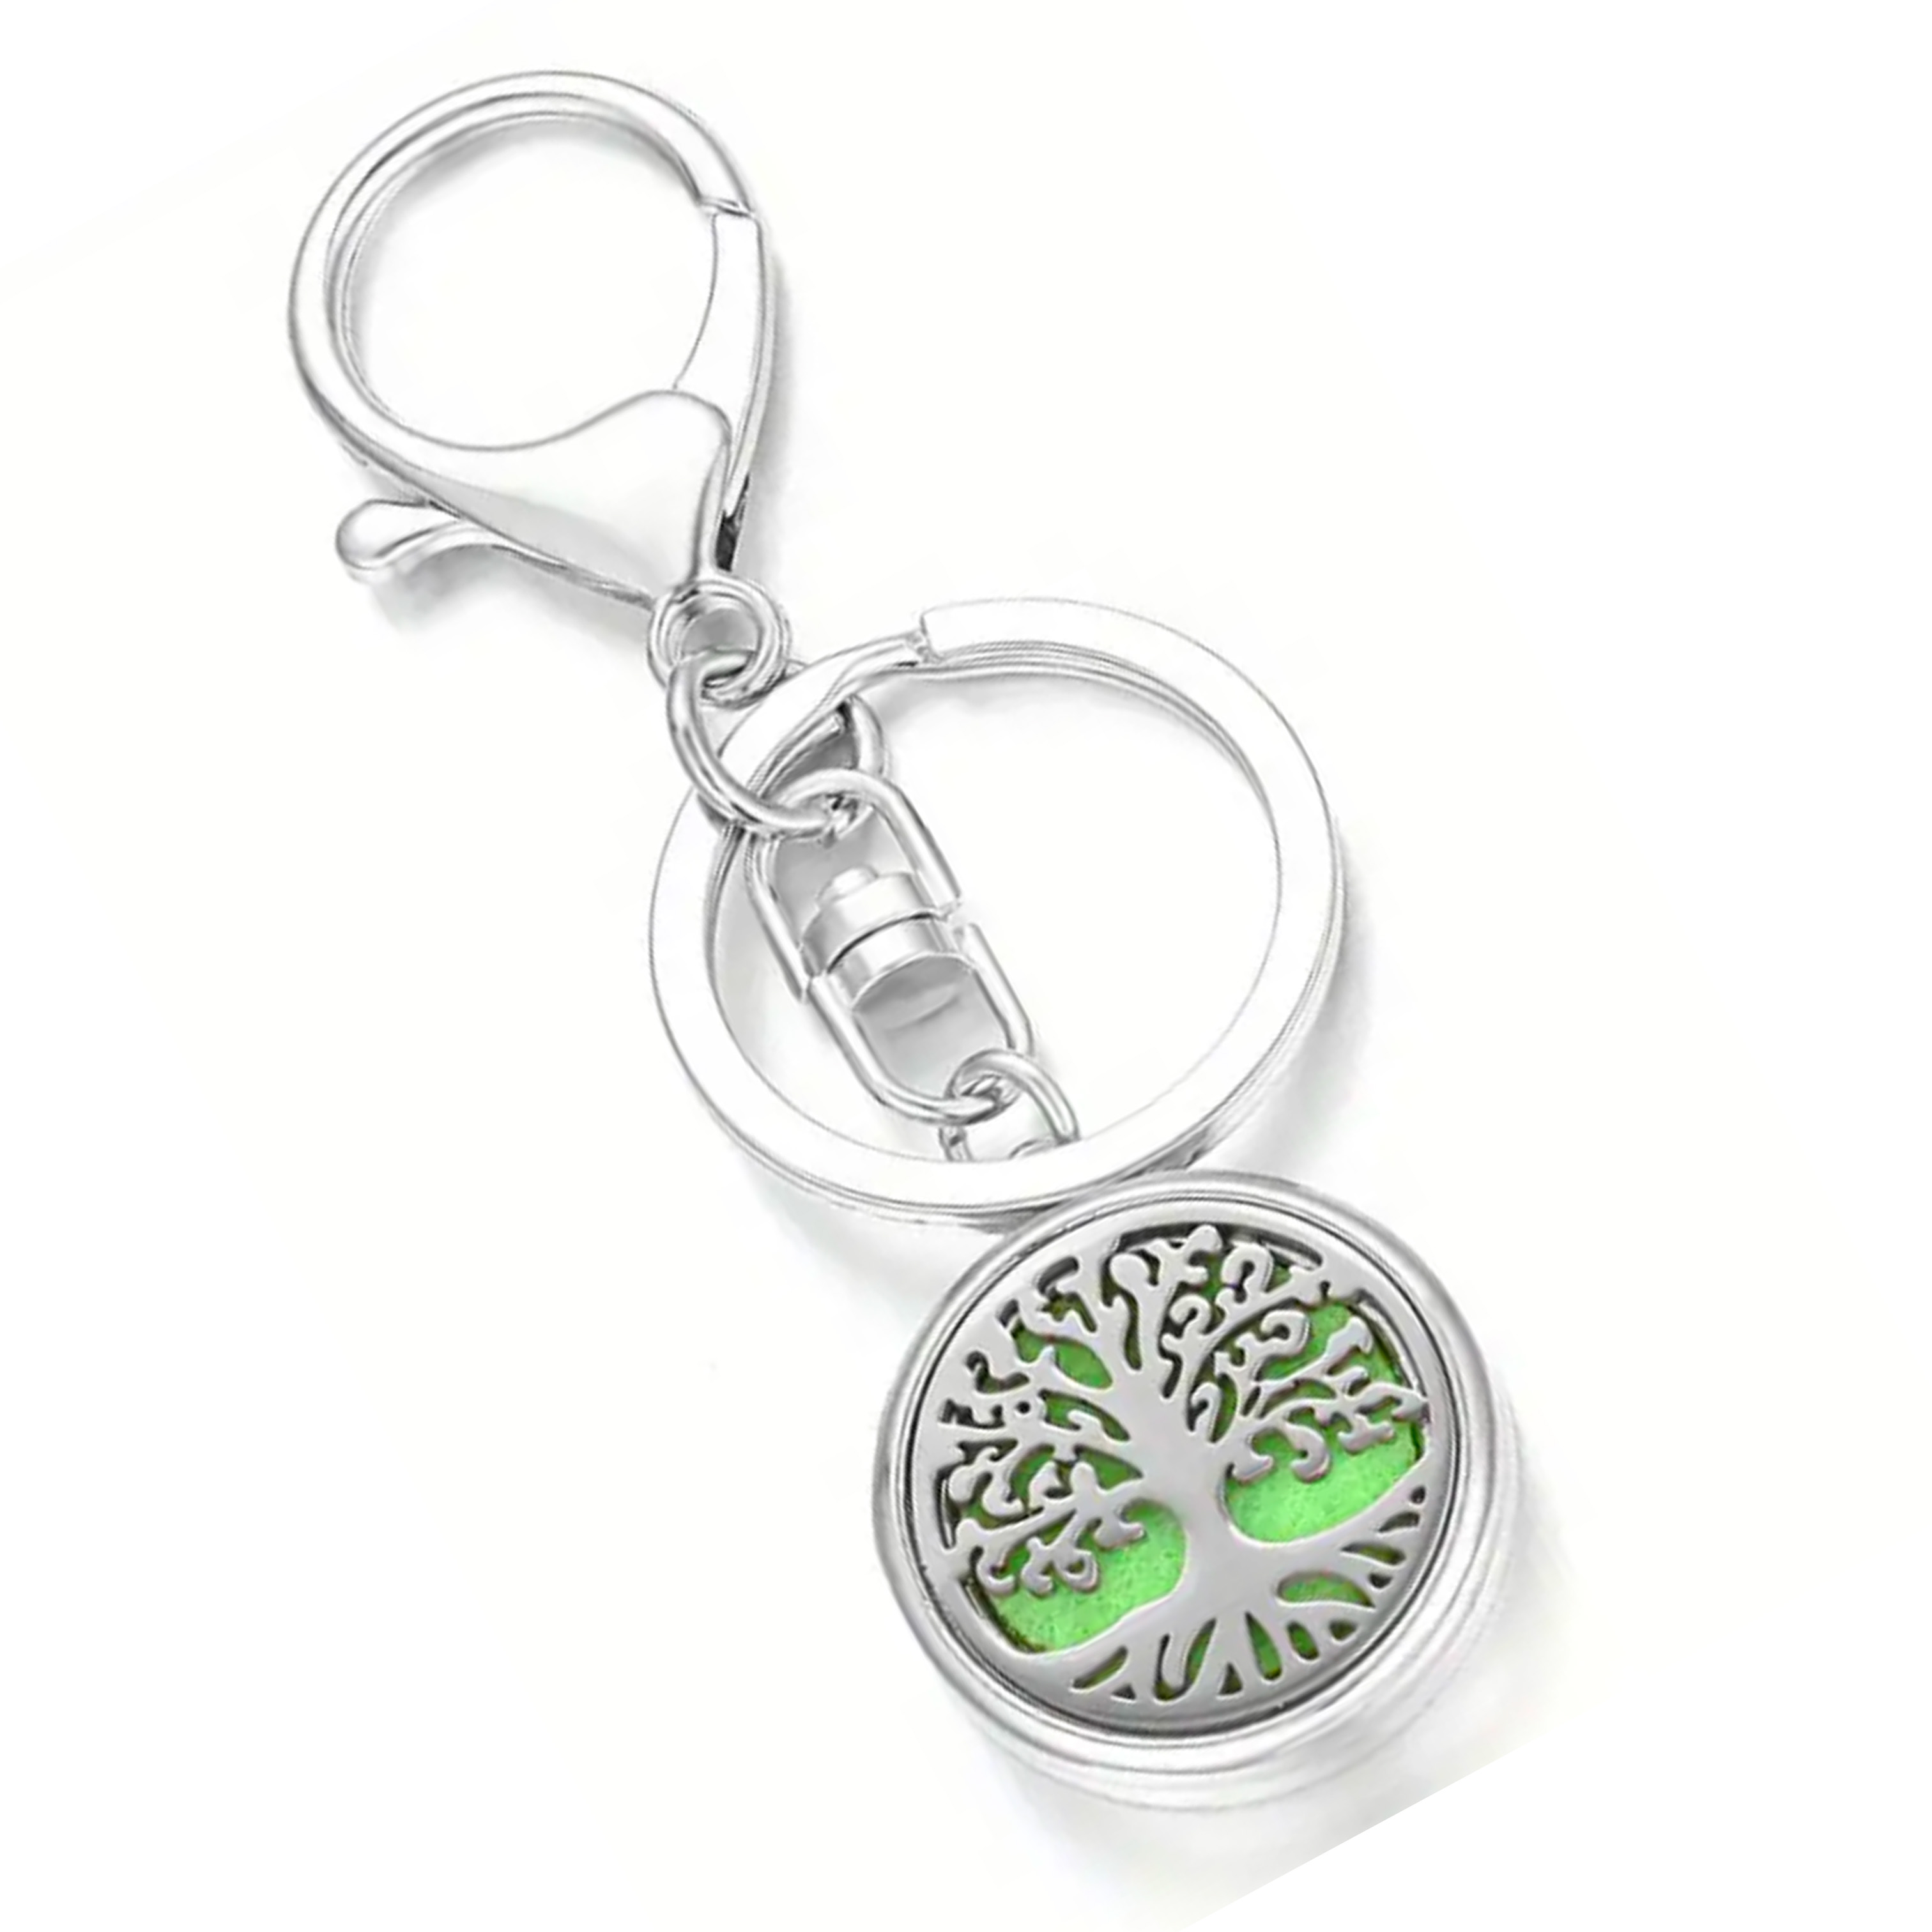 DIFFUSER KEYCHAIN - ROOTED TREE OF LIFE